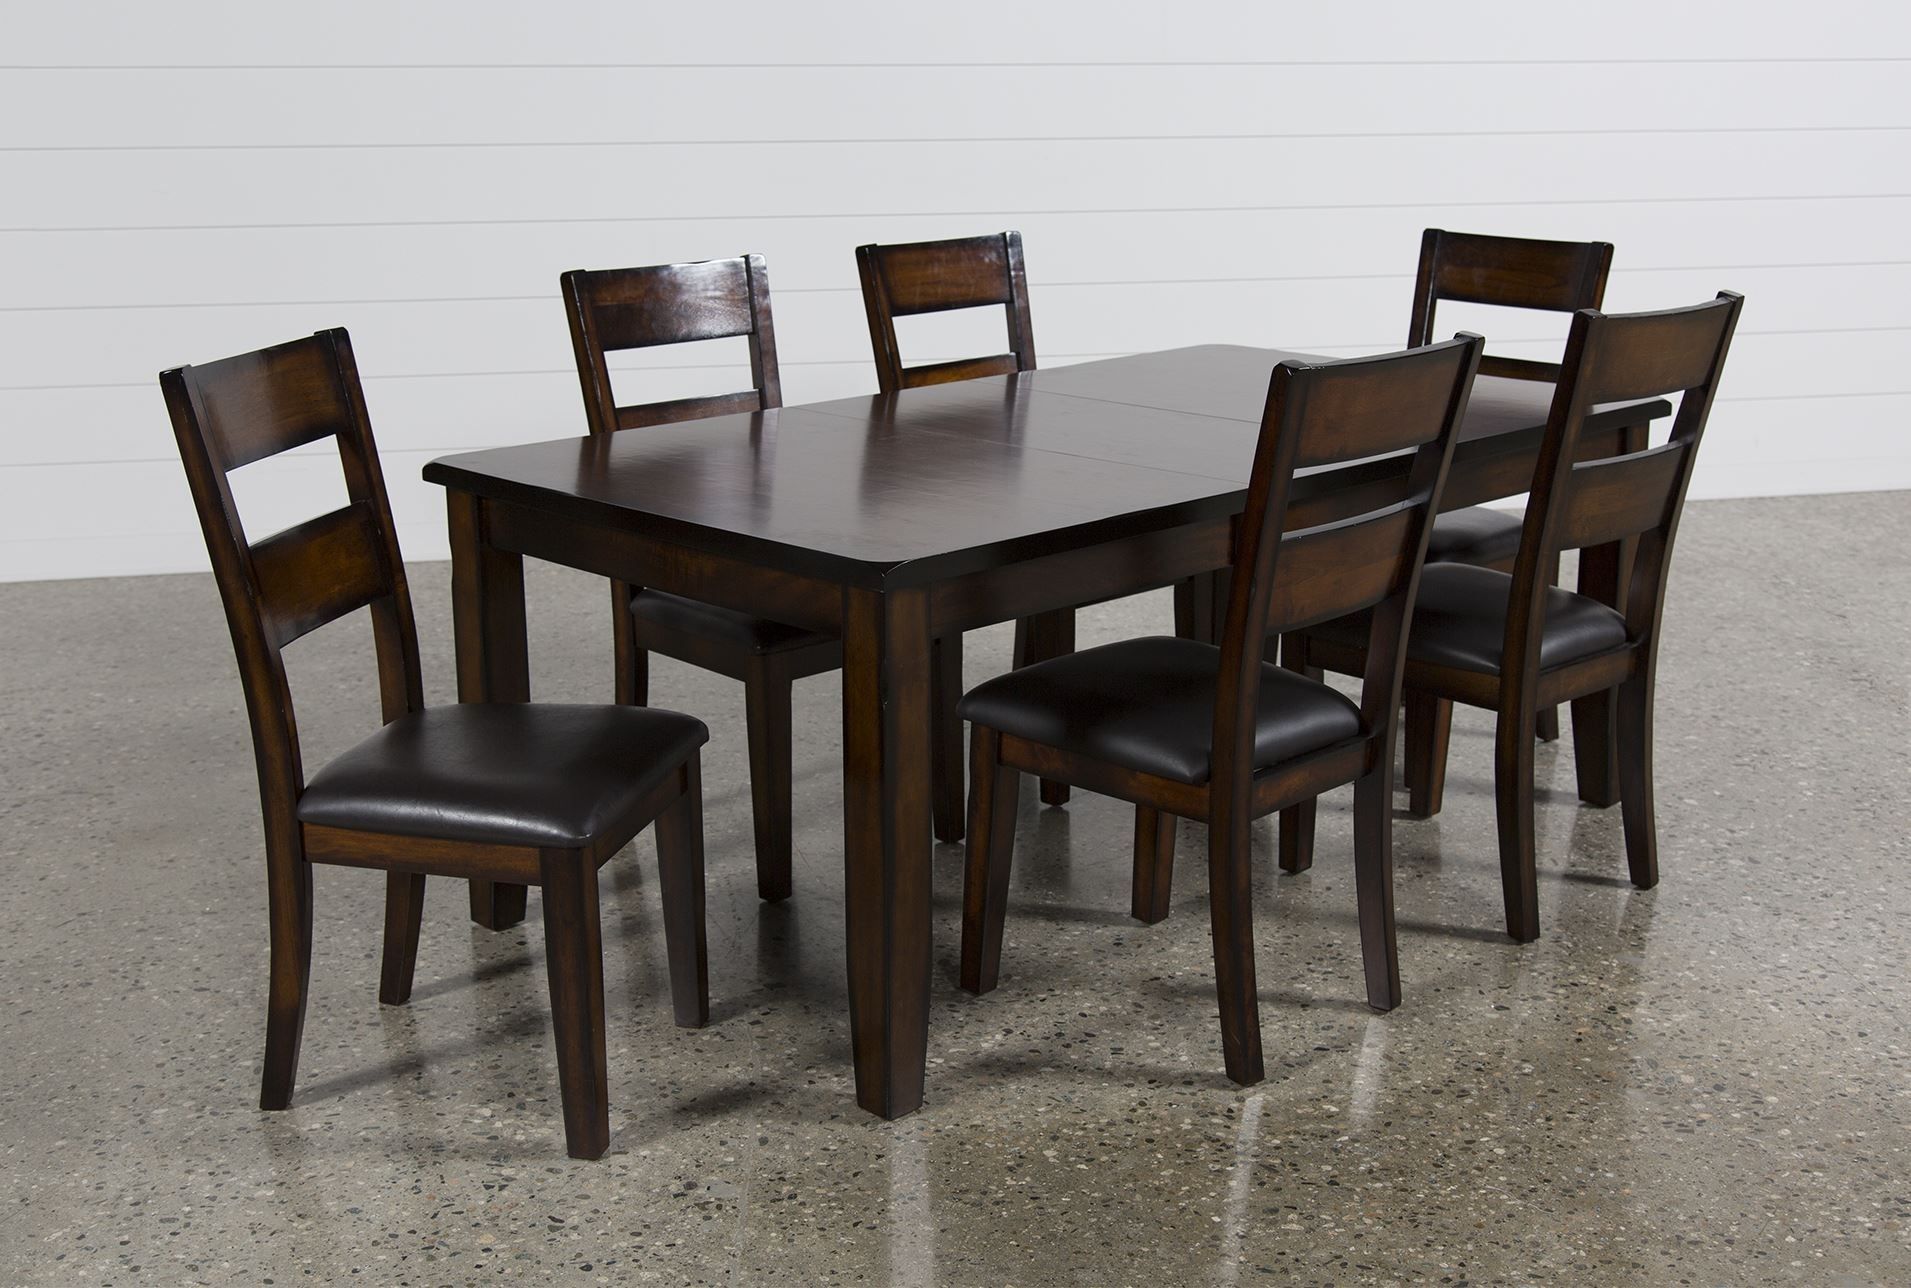 Rocco 7 Piece Extension Dining Set | For The Home | Pinterest With Regard To 2018 Rocco Extension Dining Tables (View 1 of 20)